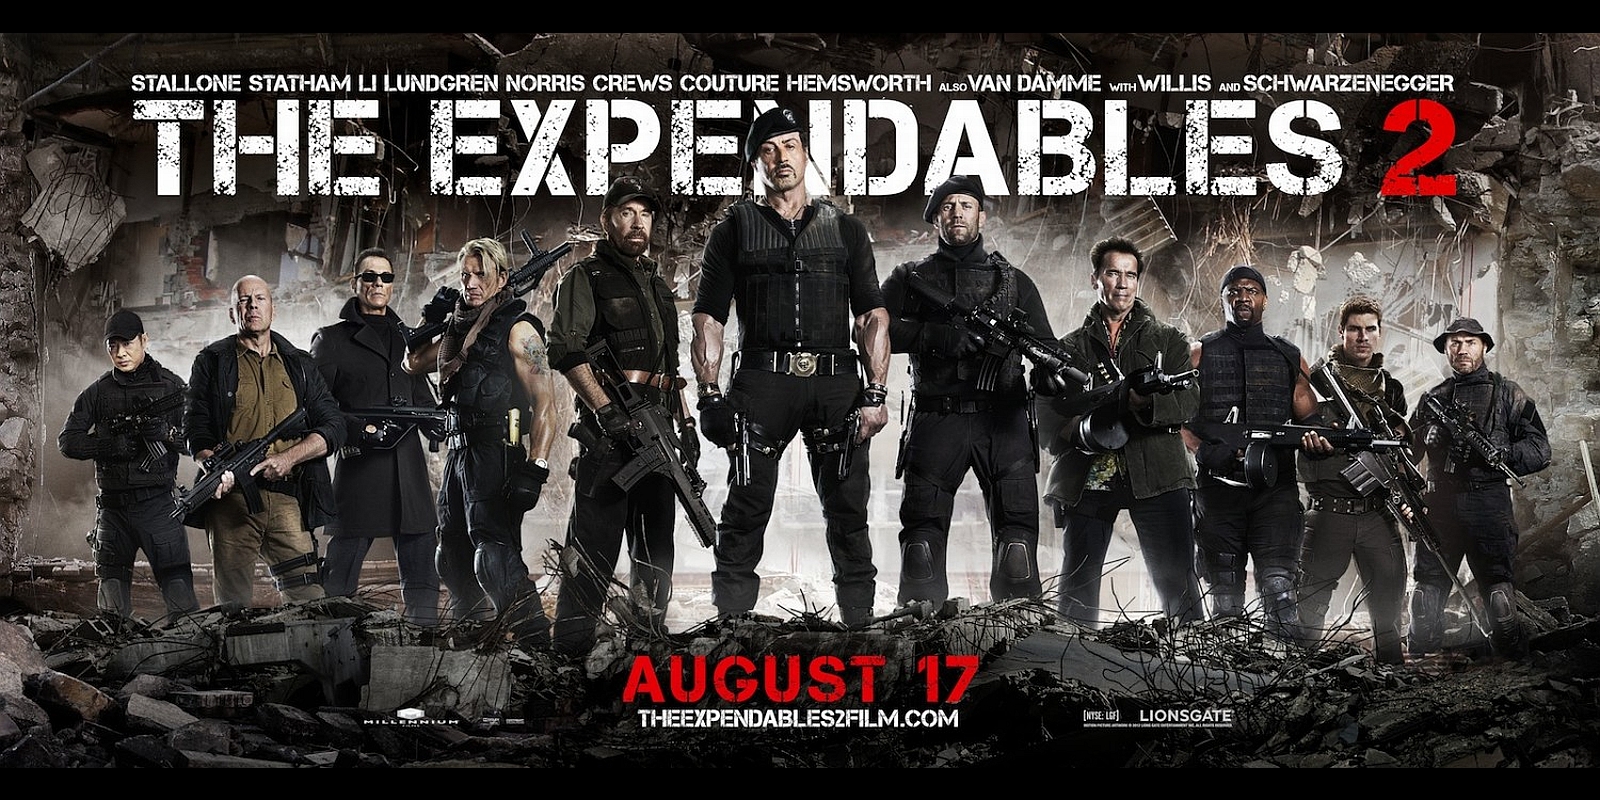 the expendables, movie, the expendables 2, arnold schwarzenegger, barney ross, billy (the expendables), booker (the expendables), bruce willis, chuck norris, church (the expendables), dolph lundgren, gunnar jensen, hale caesar, jason statham, jean claude van damme, jet li, lee christmas, liam hemsworth, randy couture, sylvester stallone, terry crews, toll road, trench (the expendables), vilain (the expendables), yin yang (the expendables) High Definition image